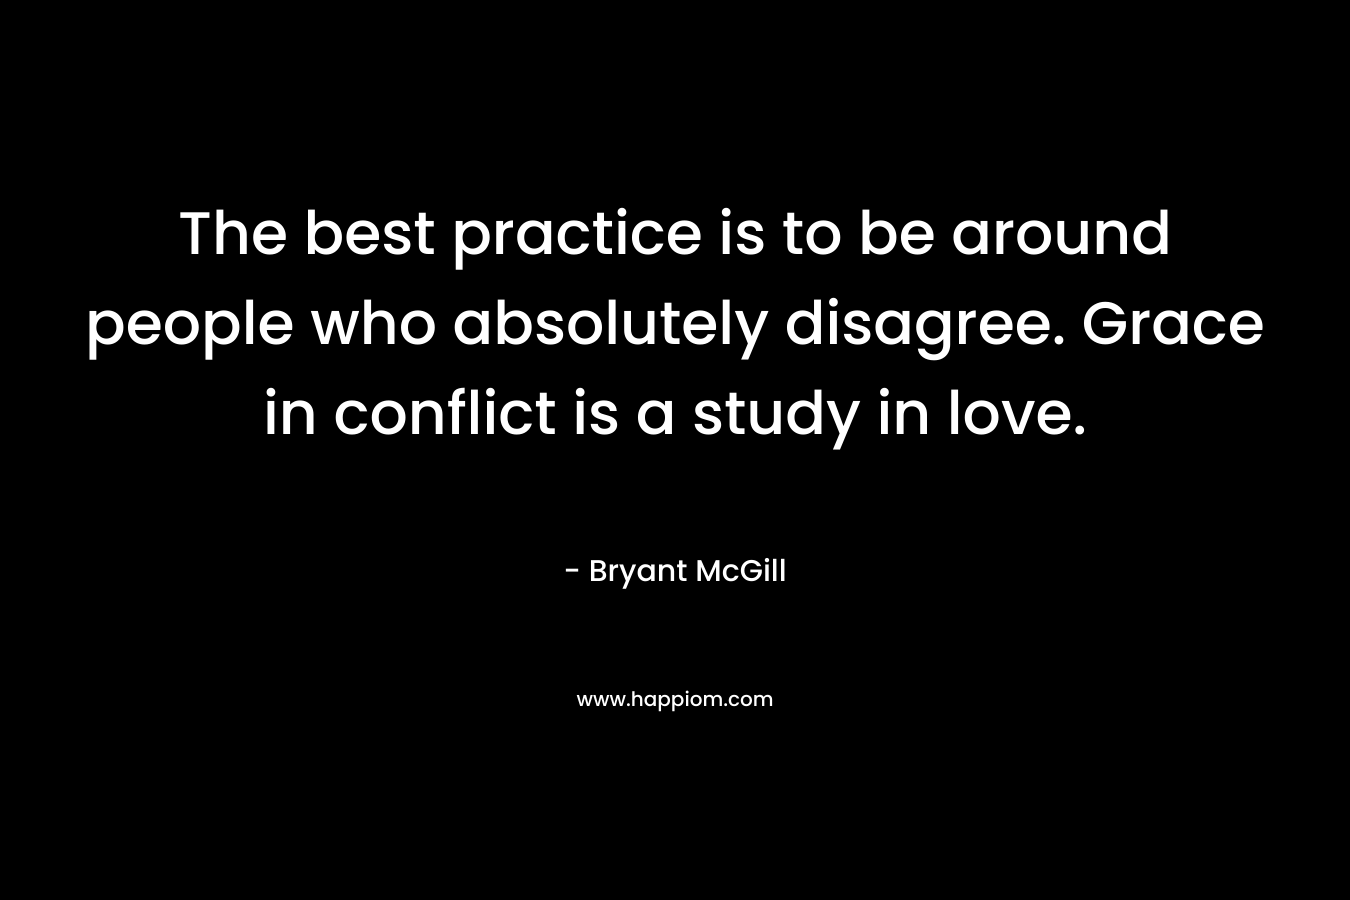 The best practice is to be around people who absolutely disagree. Grace in conflict is a study in love. – Bryant McGill